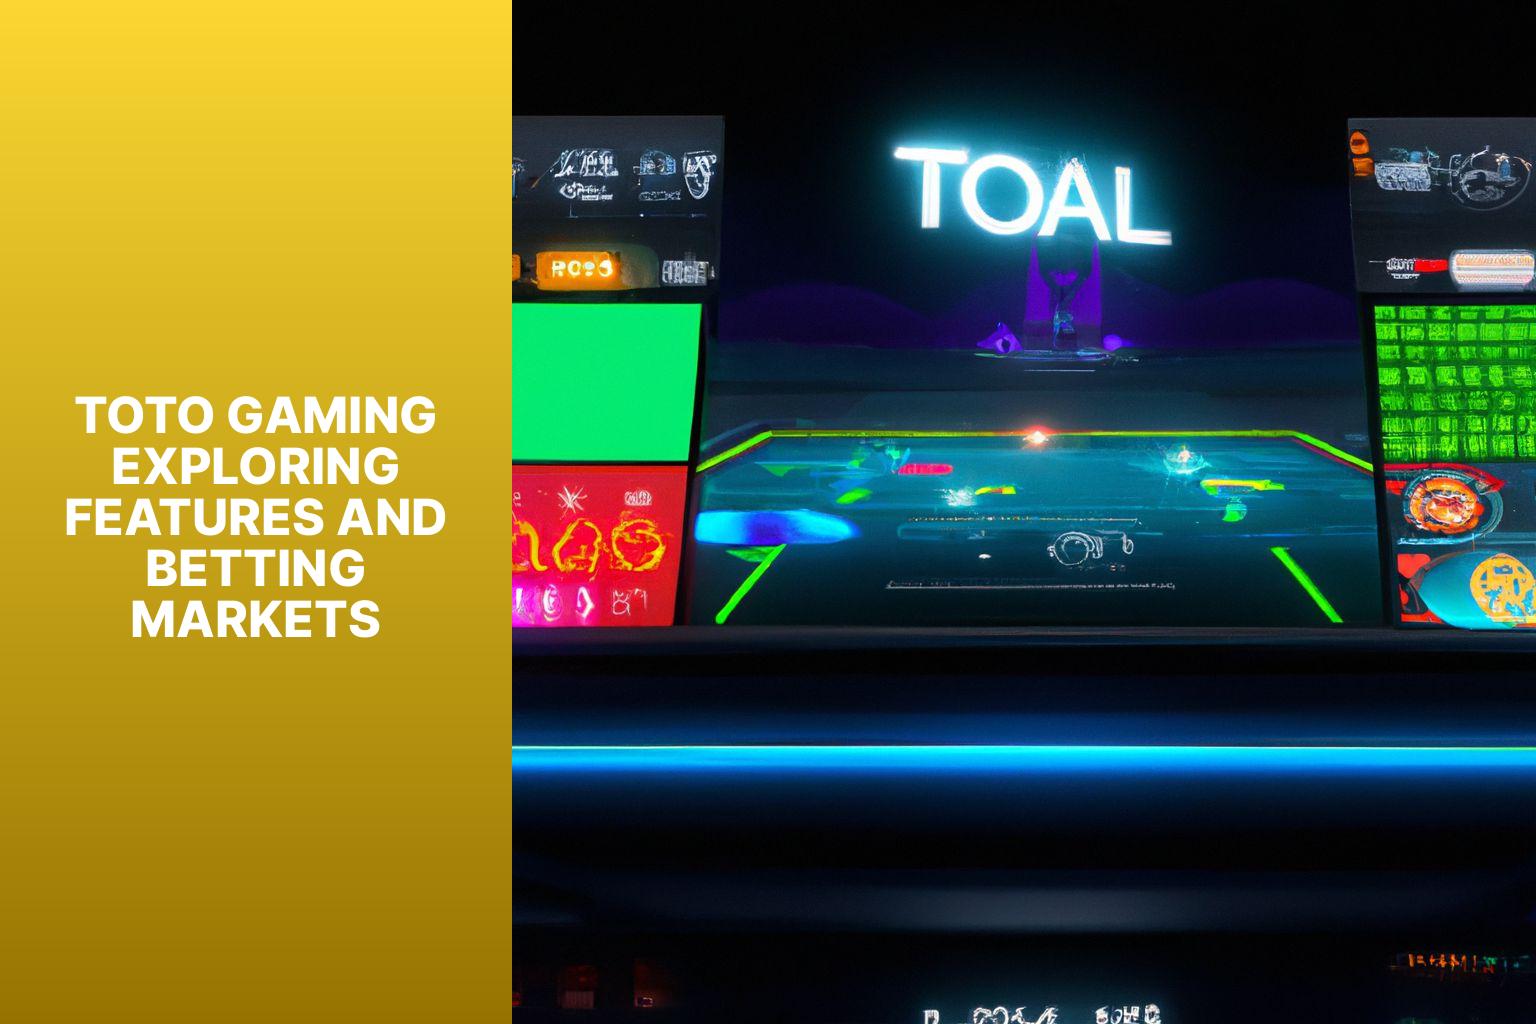 Toto Gaming Exploring Features and Betting Markets